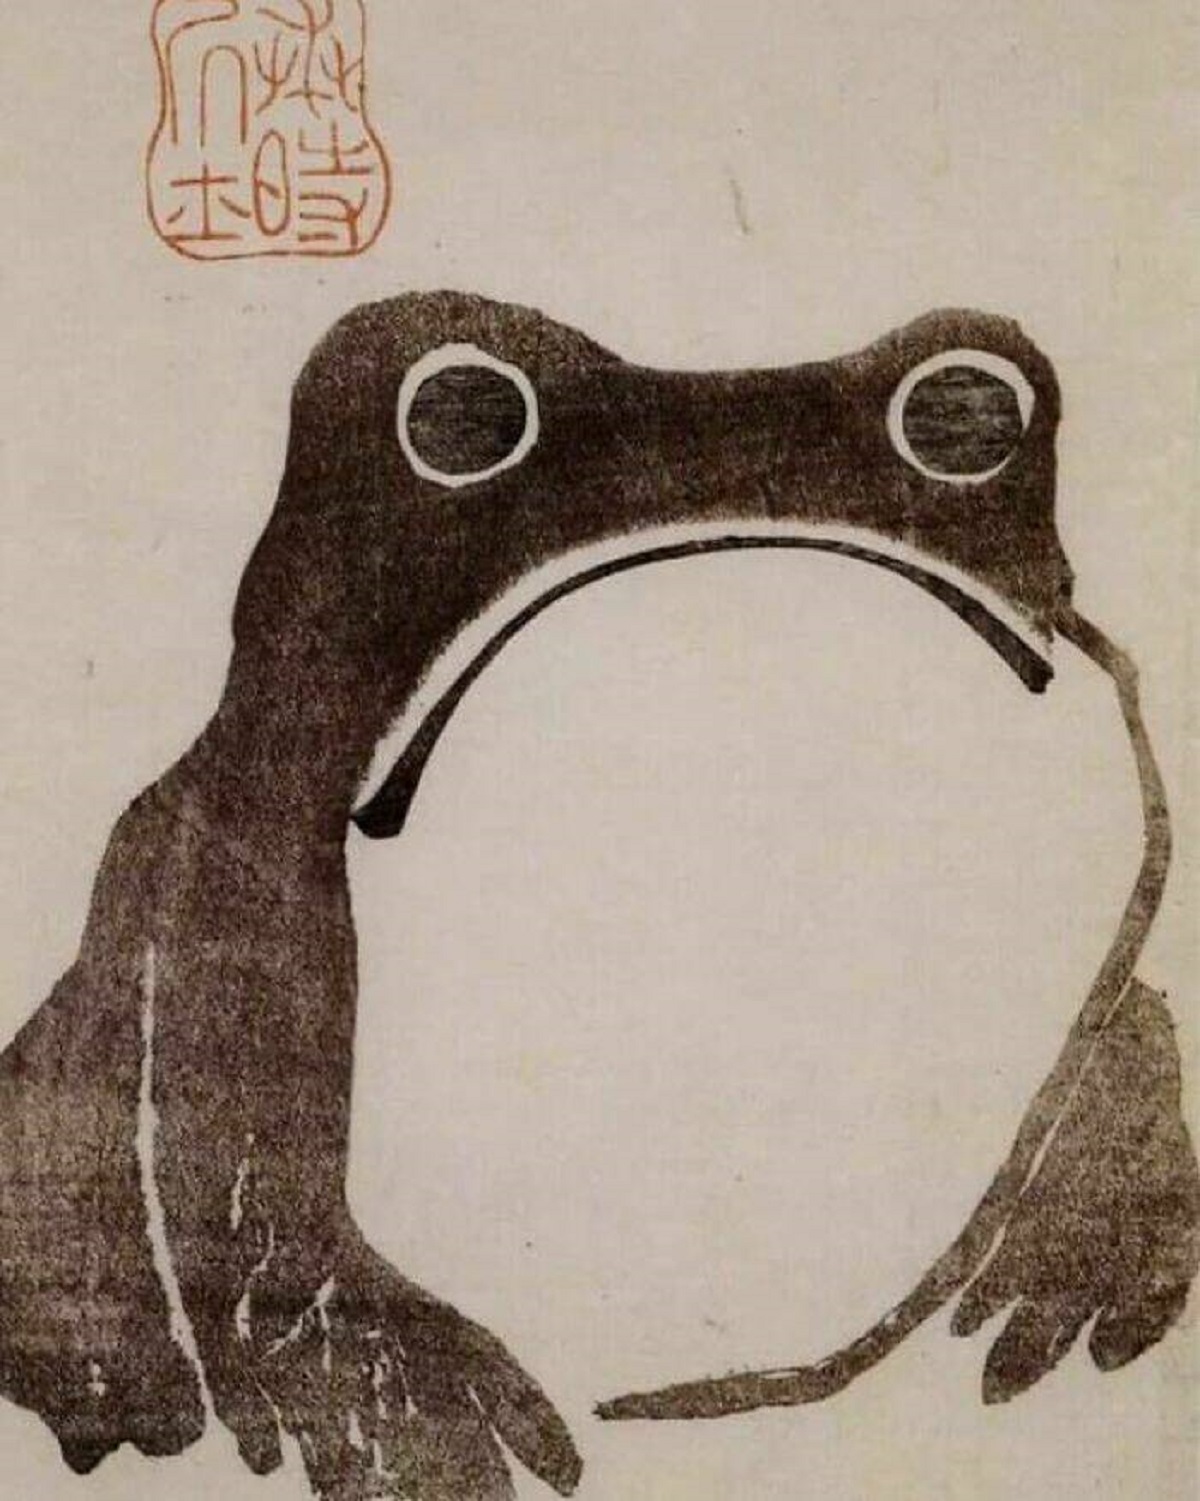 "Frog, By The Japanese Artist Matsumoto Hoji. 1814 Ce"